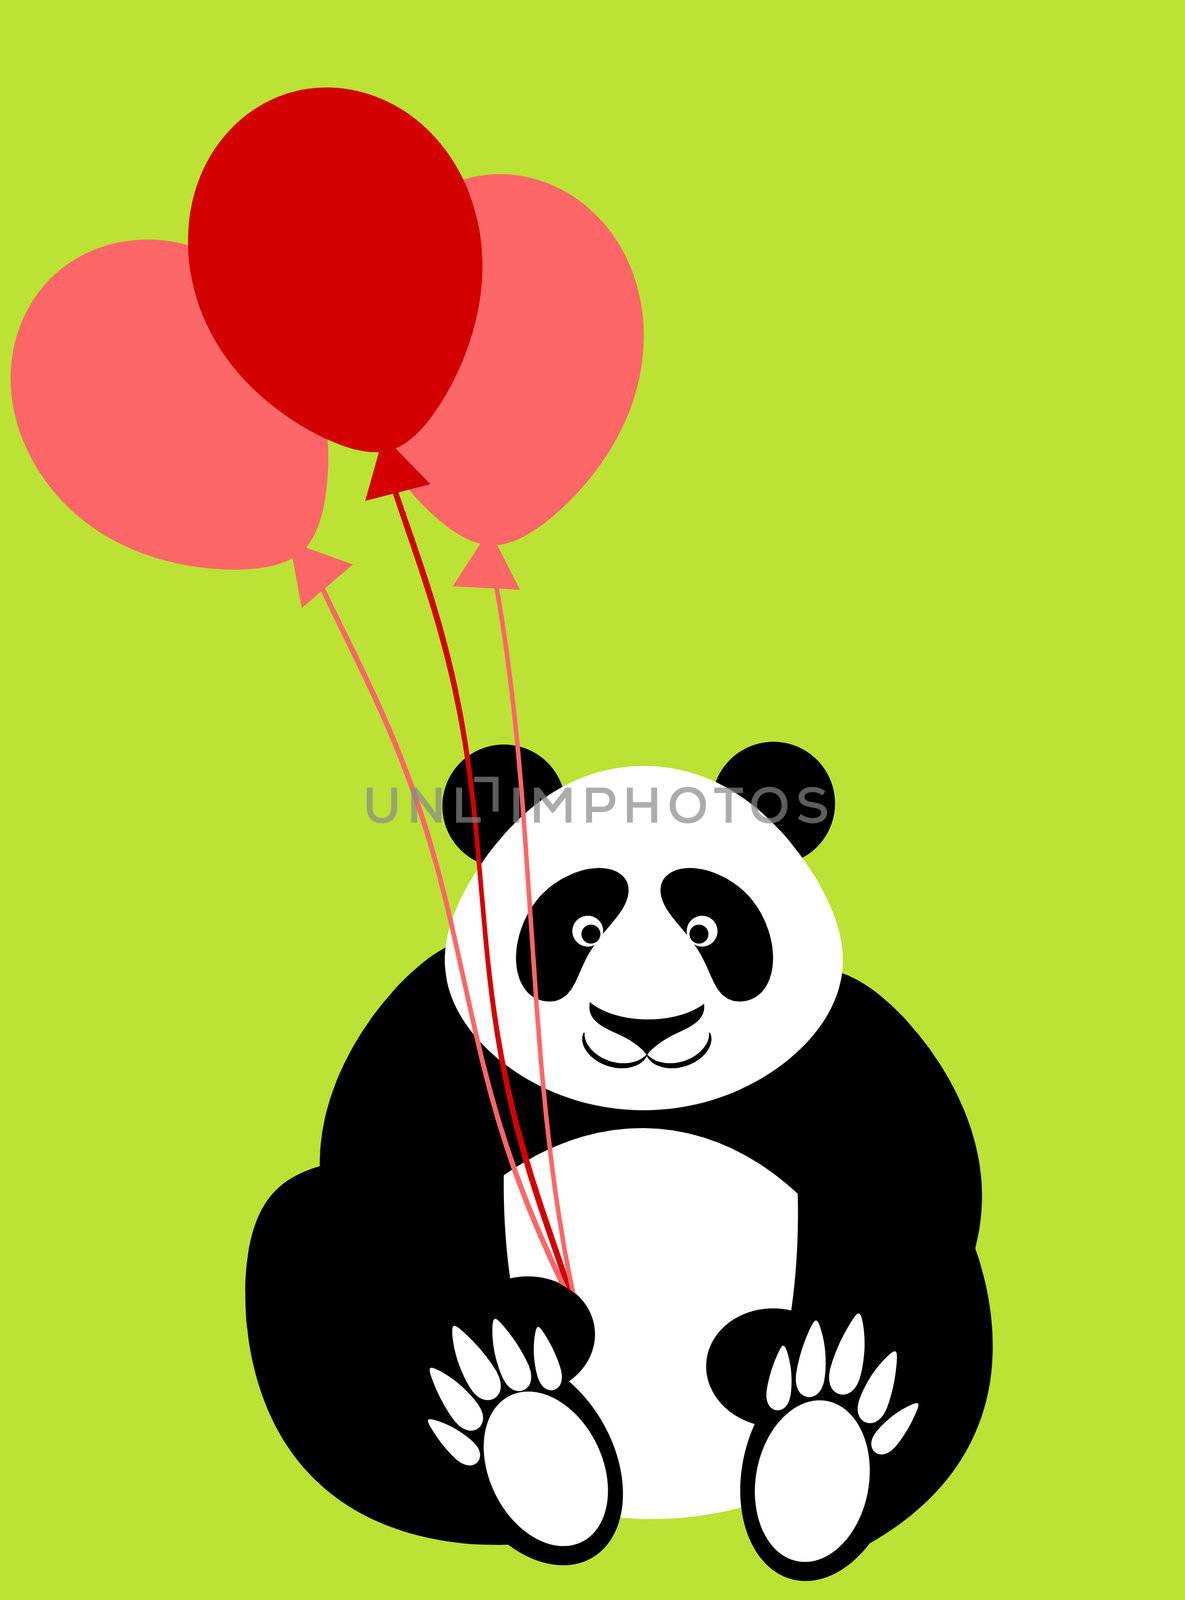 Happy Valentines Day Panda Bear Holding Balloons by Davidgn